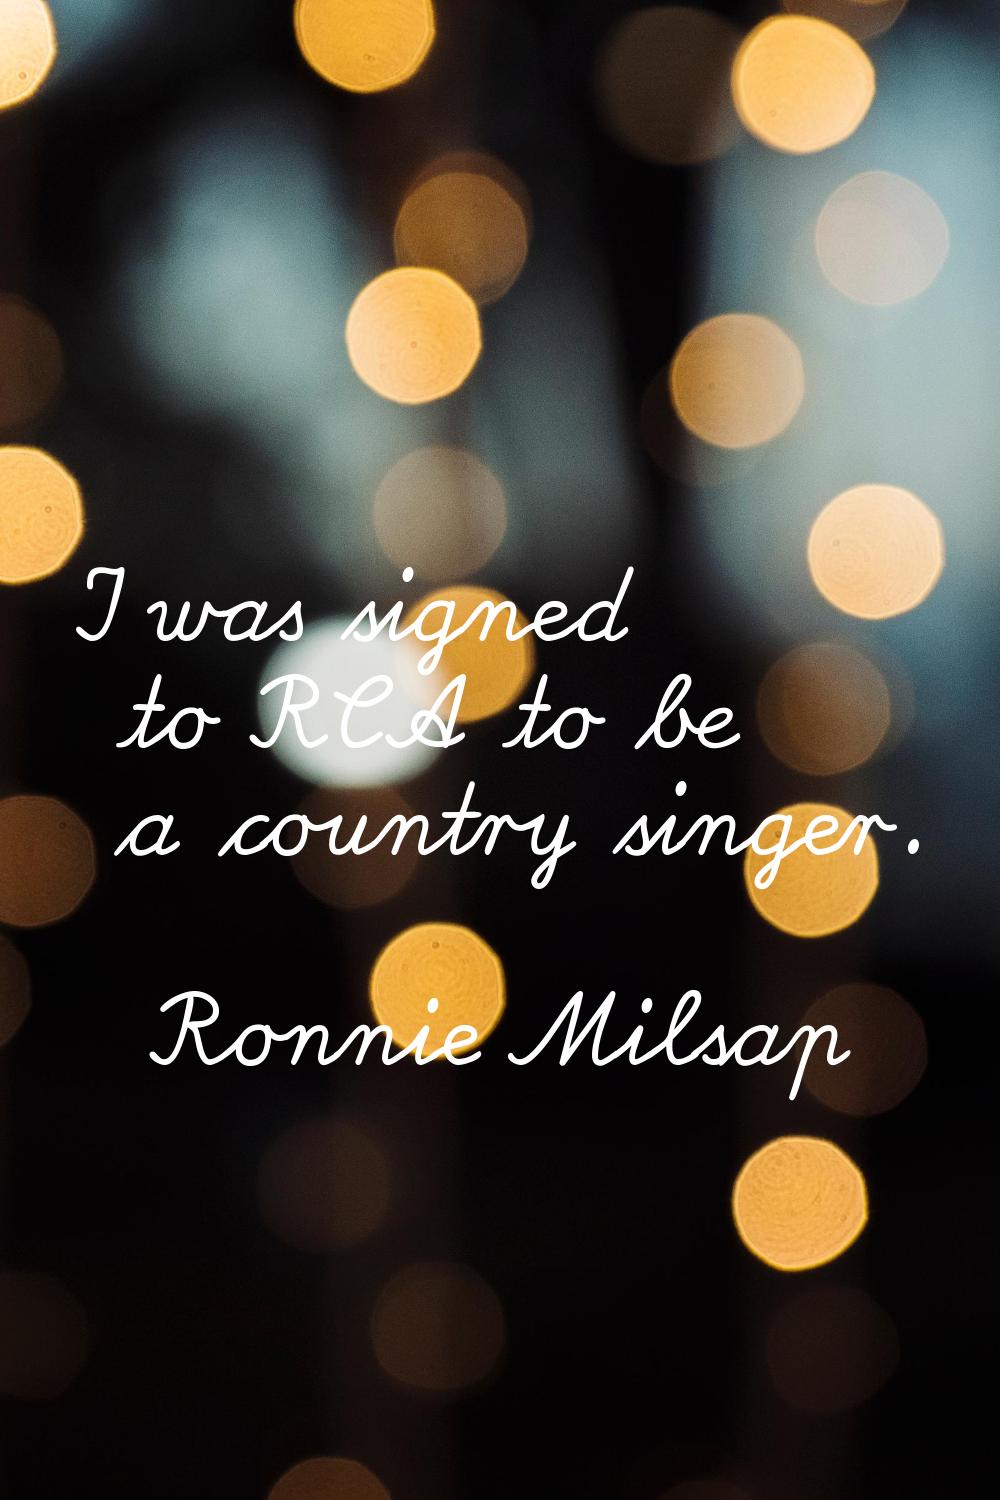 I was signed to RCA to be a country singer.